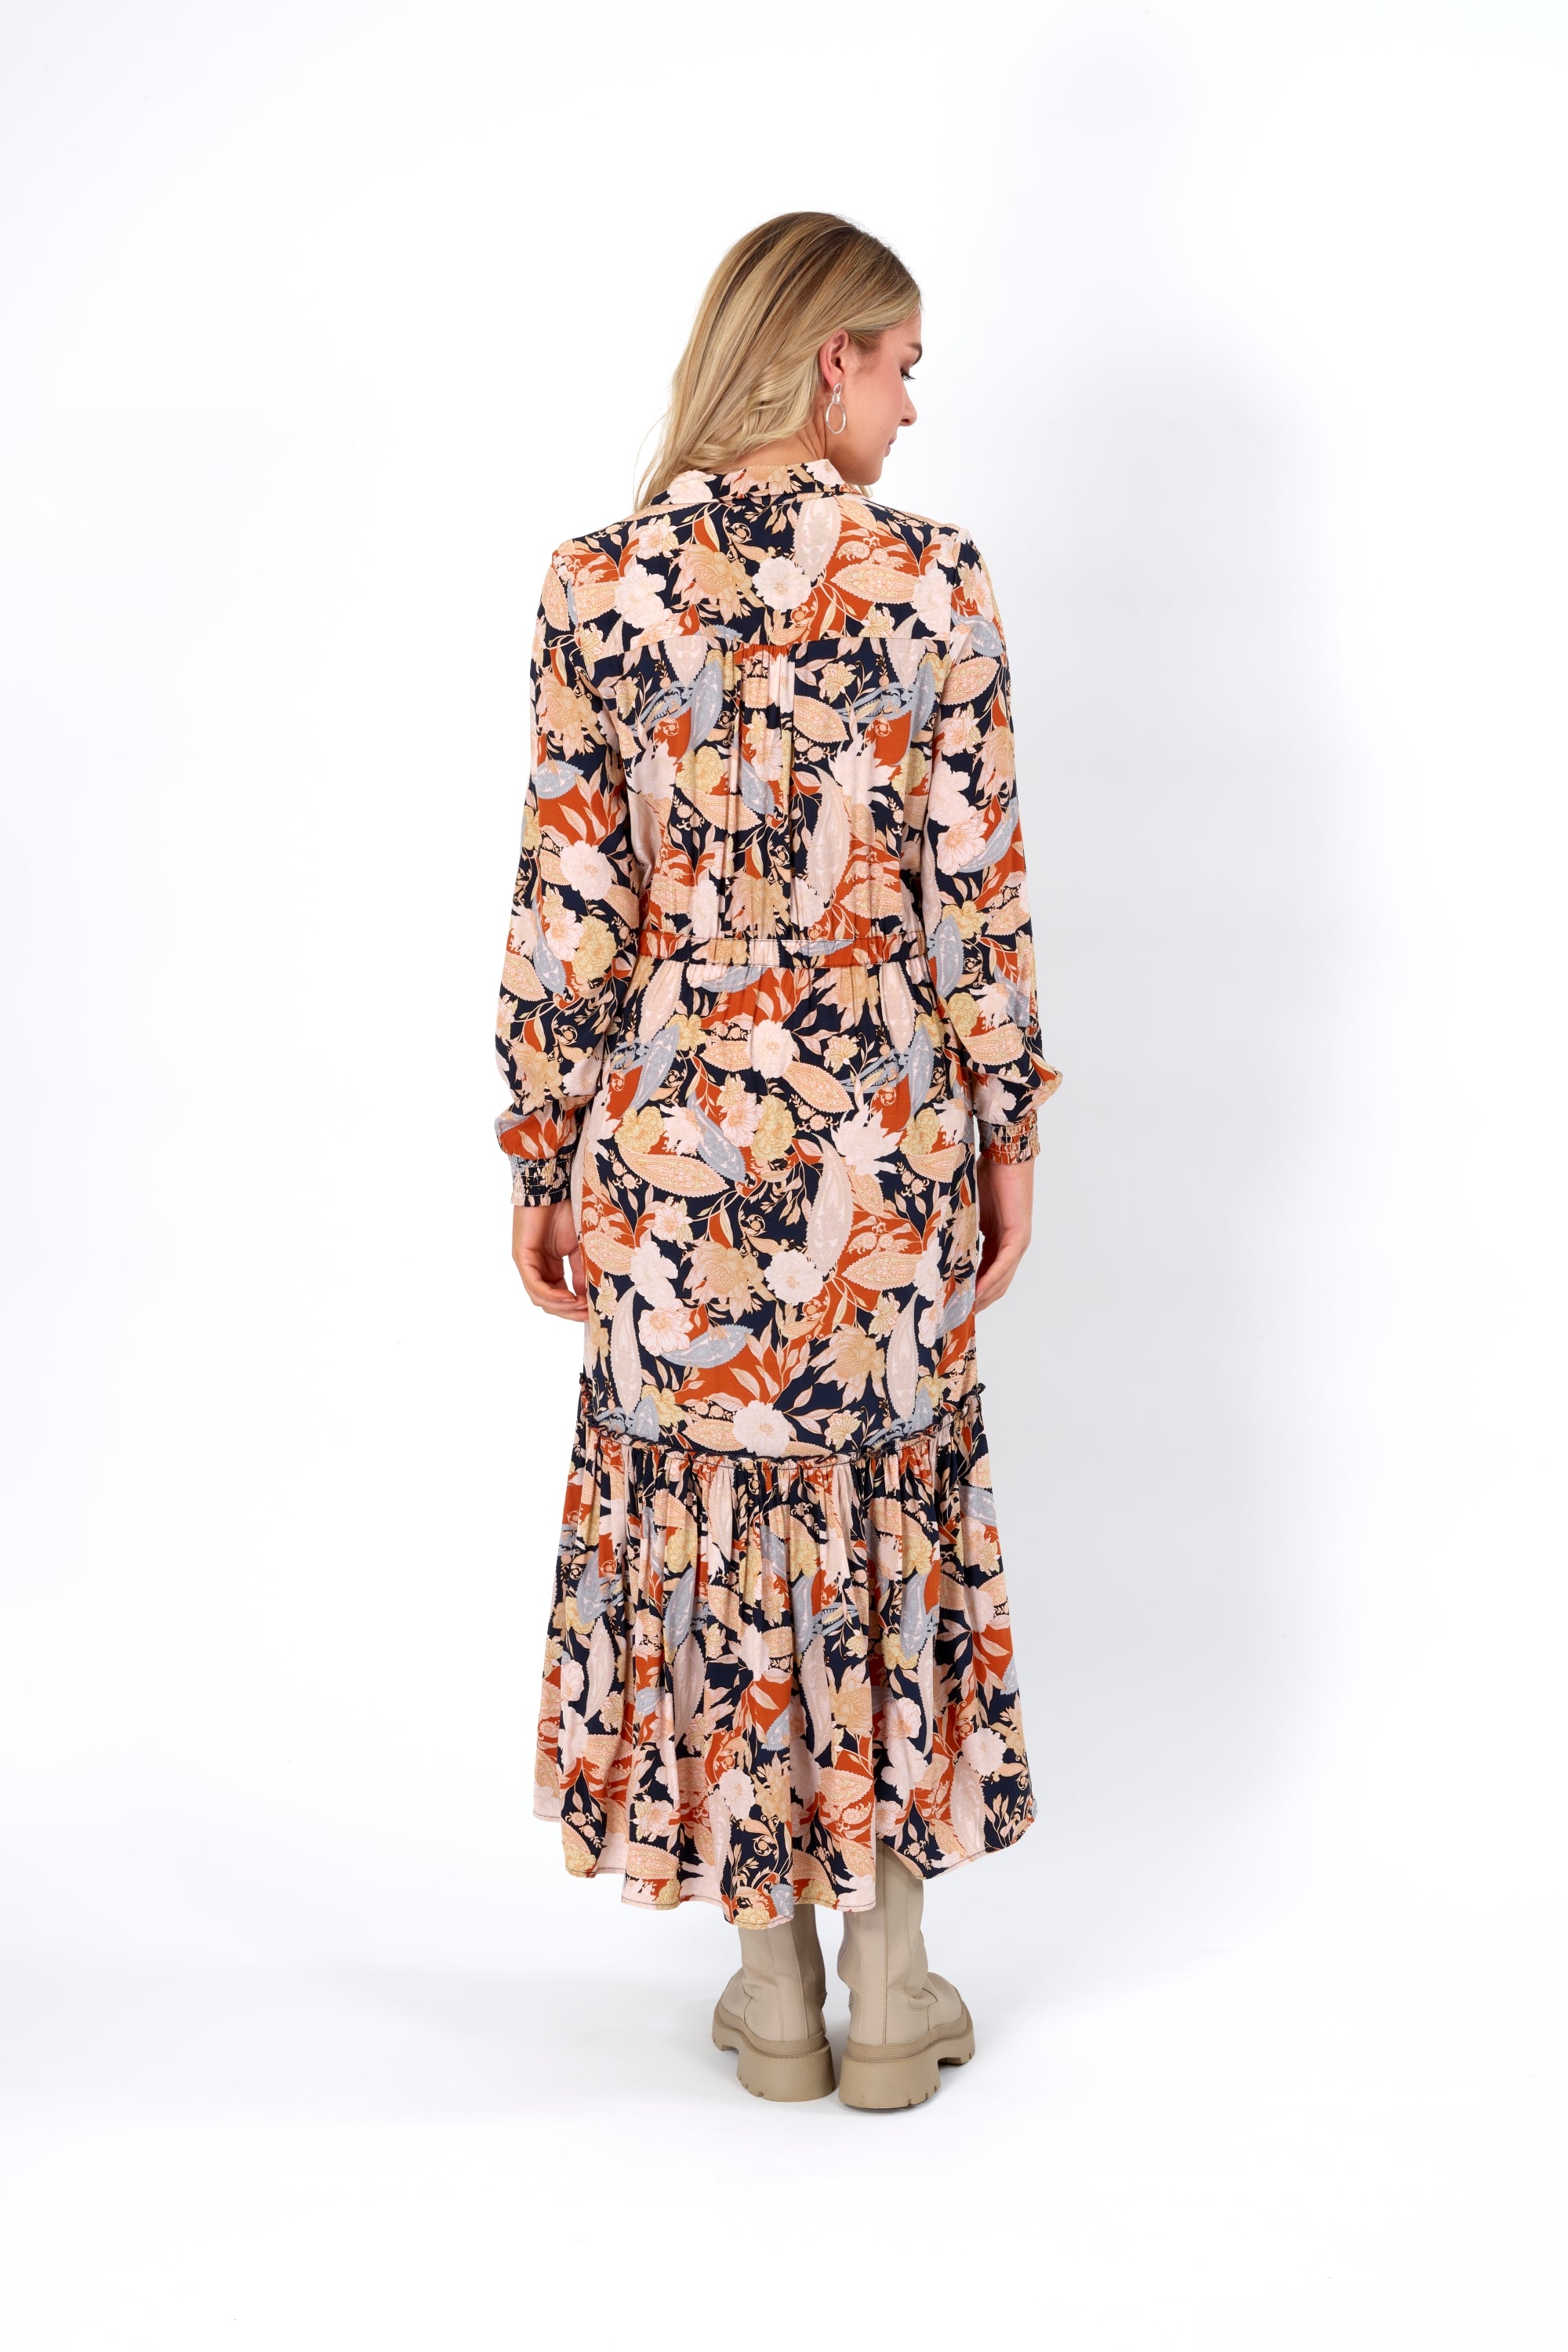 Knewe Assembly Dress - Spicy Bloom